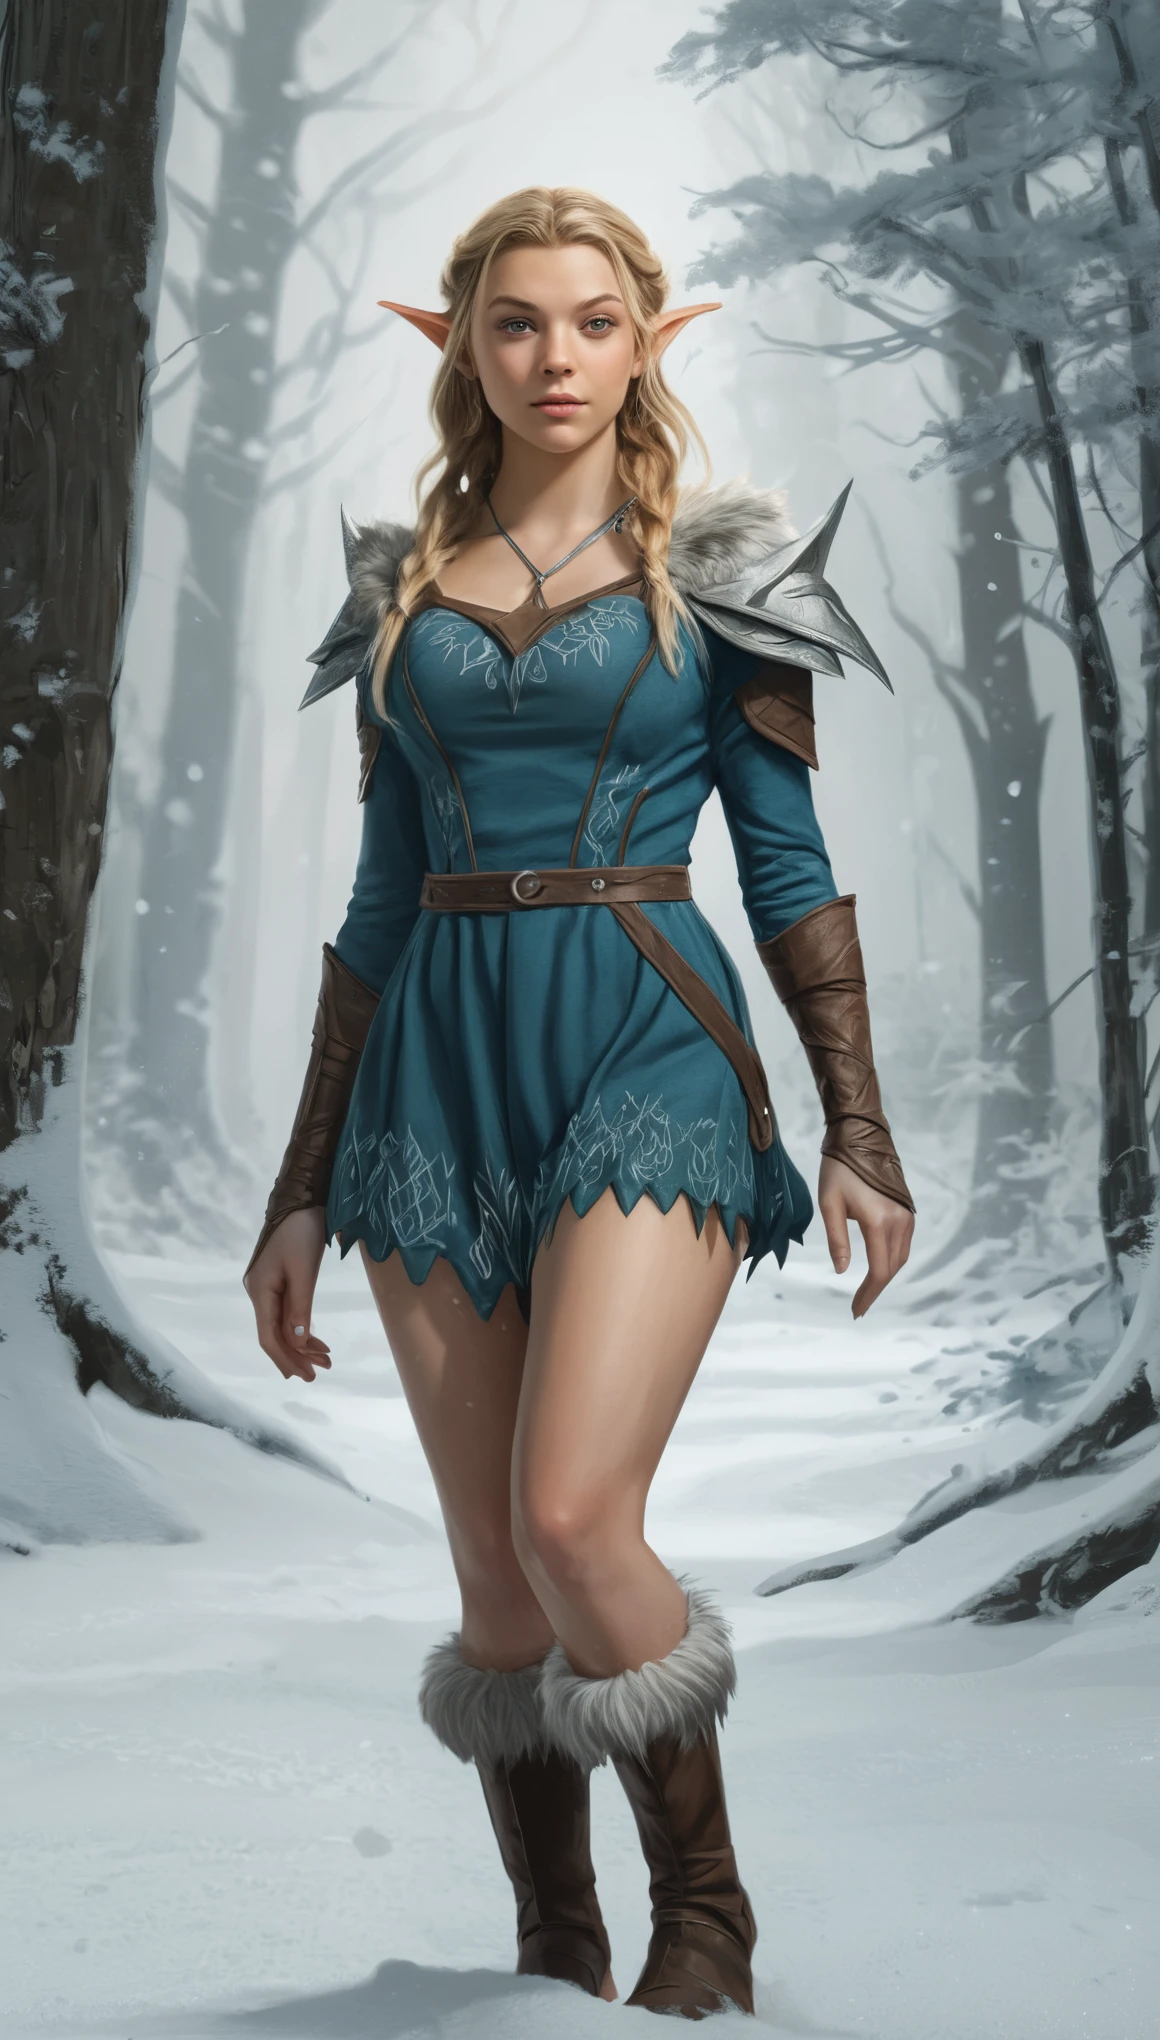 An illustrated movie poster, hand-drawn, full color, a teenage elven girl, wearing an overall shorts, resembles Natalie Dormer, sun-tanned complexion, very tall, Amazonian body, hourglass figure, curvy, toned midriff, bottom-heavy, generous hips, massive bubble-butt, long legs, ridiculously thick powerful thighs, long pointy elf ears, blonde hair, long loose waves, posing in a snowy boreal forest, hard shadows, graphite shading, stencil marks, airbrushed acrylic paint, masterpiece, in the style of Skyrim 